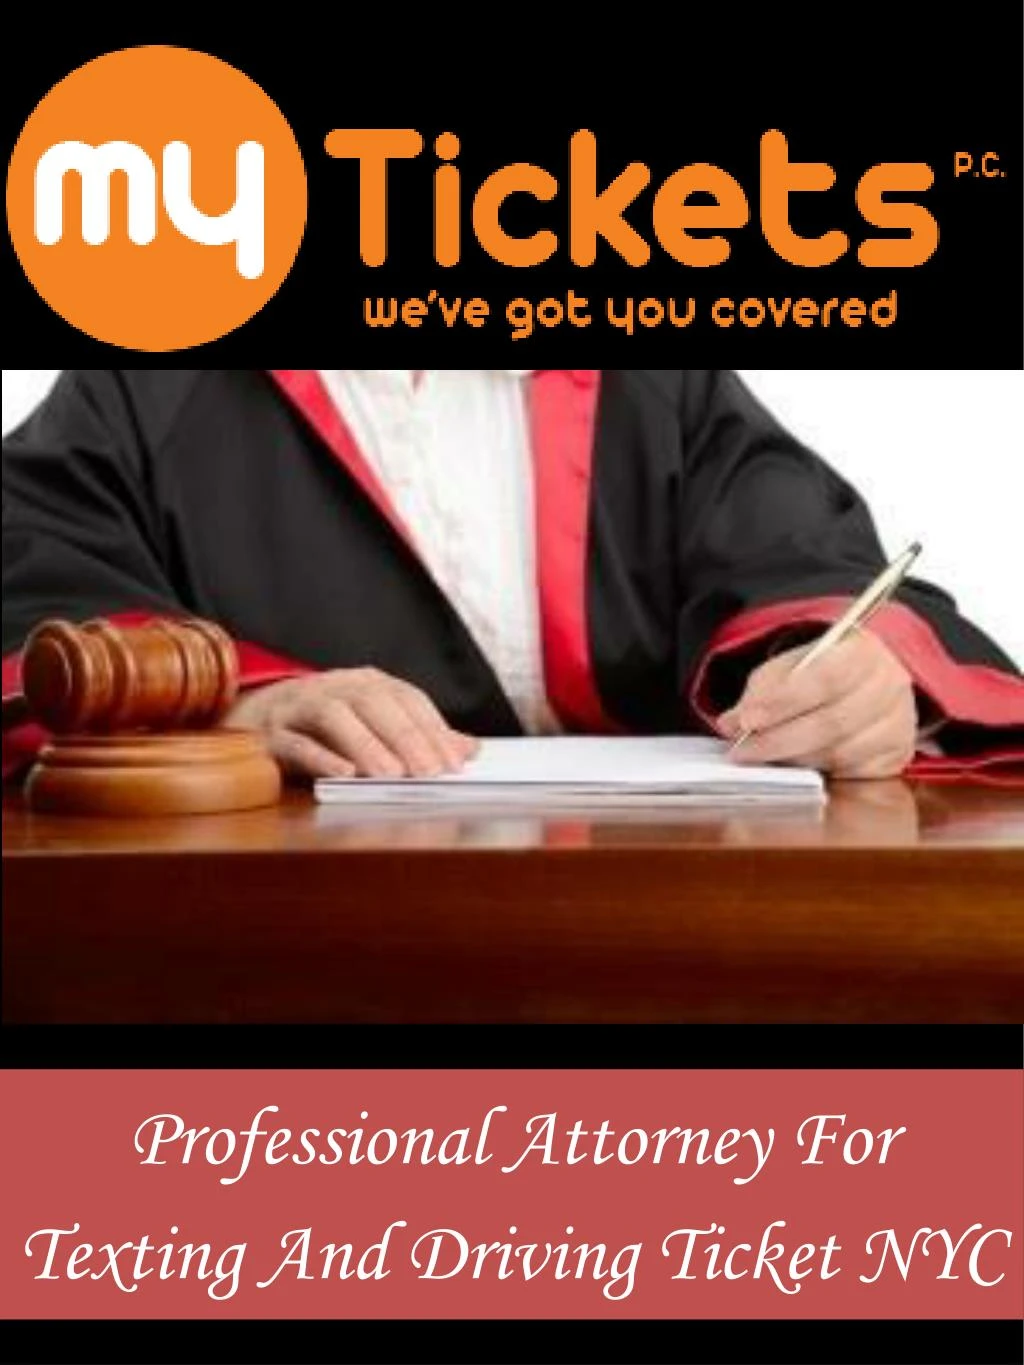 professional attorney for texting and driving ticket nyc